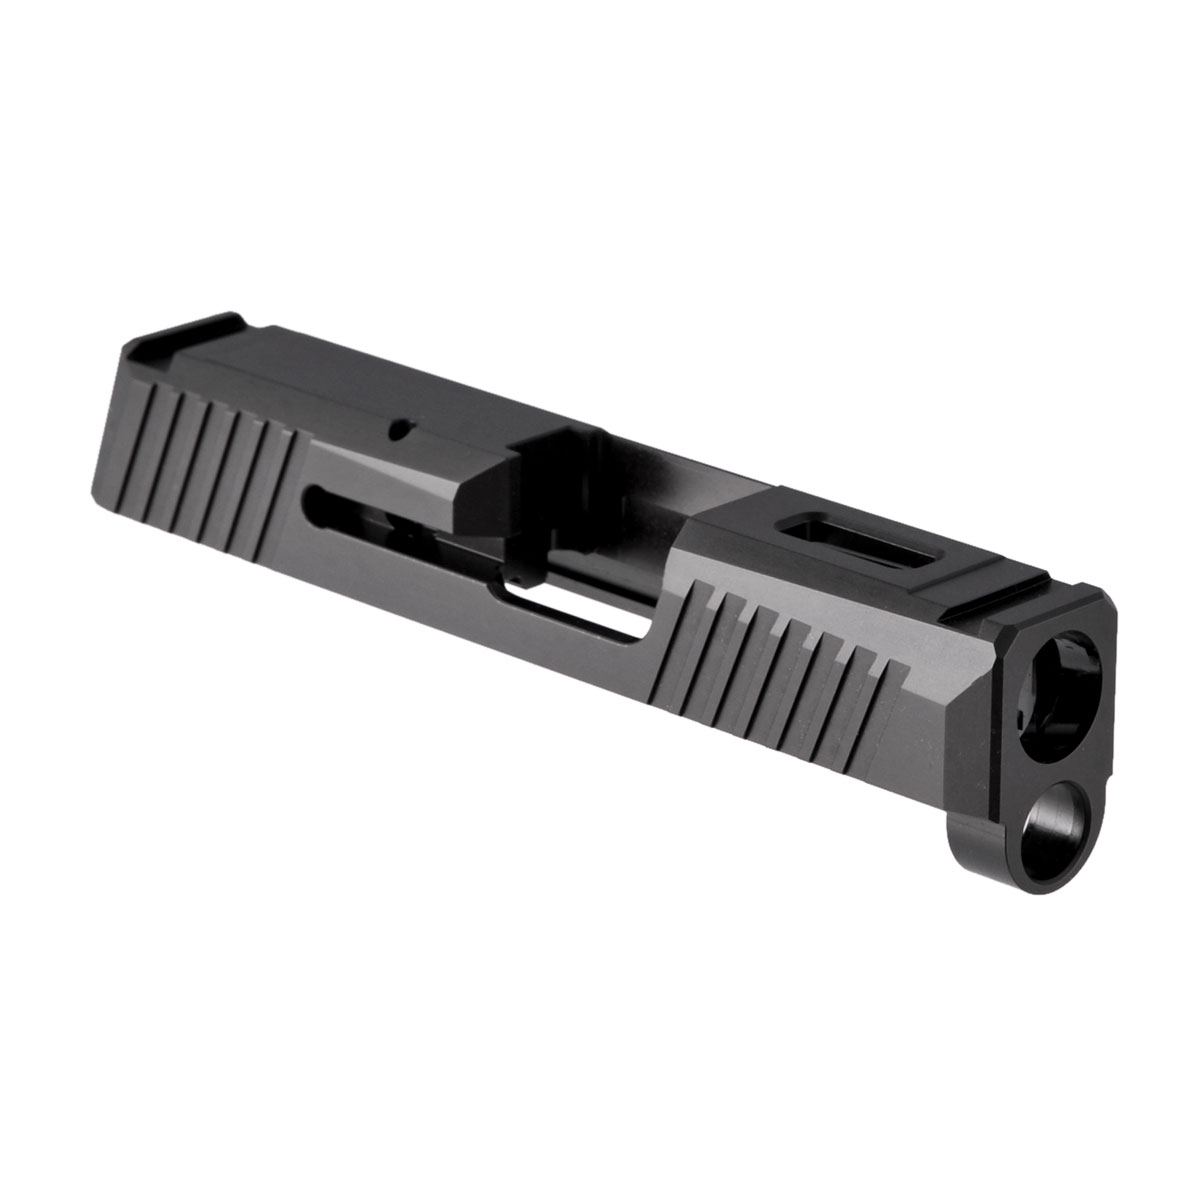 BROWNELLS - IRON SIGHT SLIDES FOR SIG P365